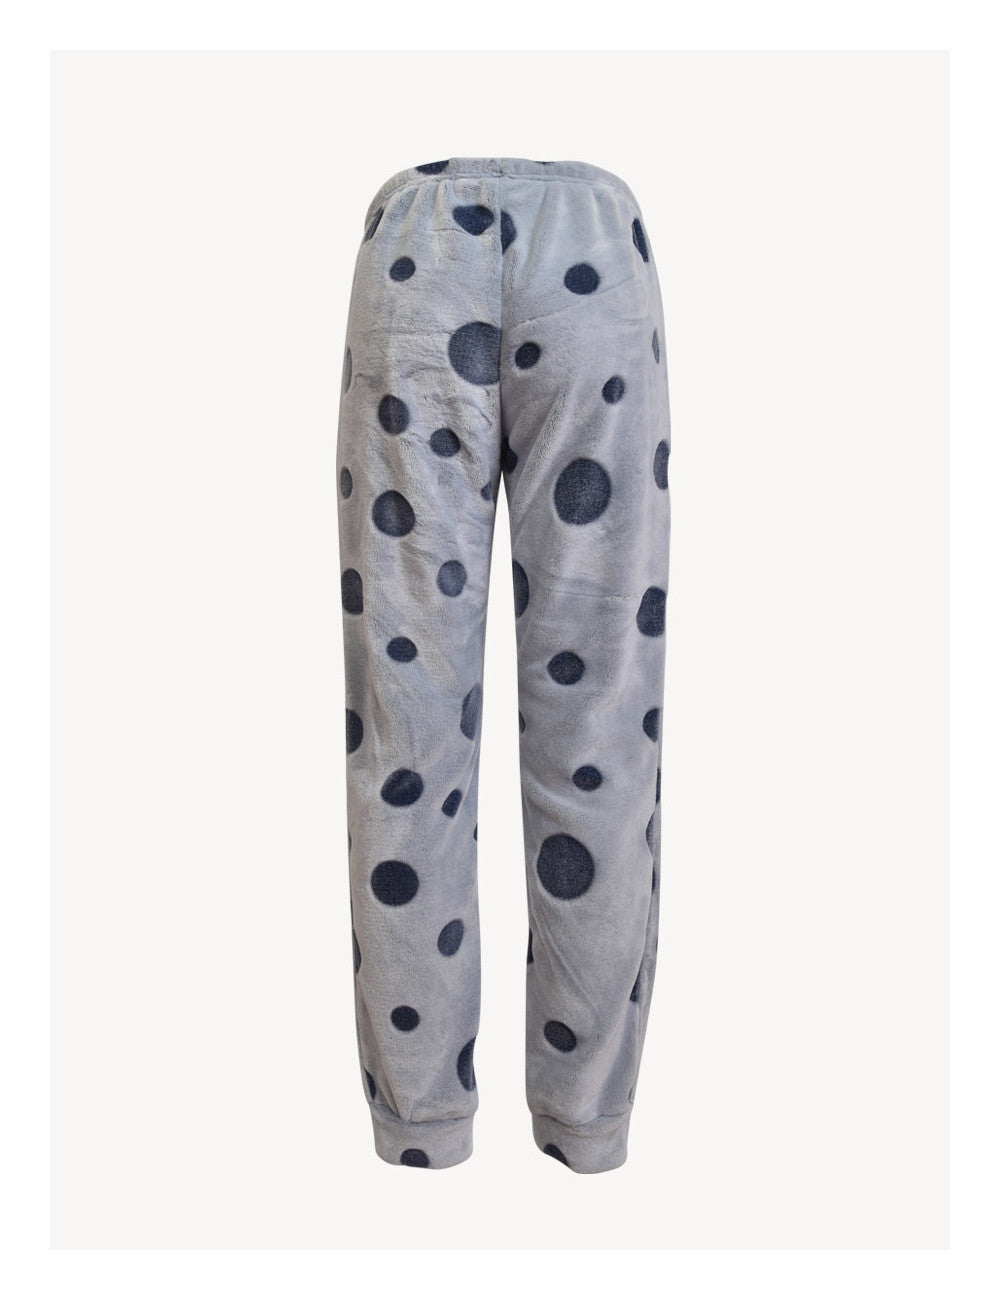 Long sleeve plush pajamas pants with bubble designed fabric by SIeLEI from Italy